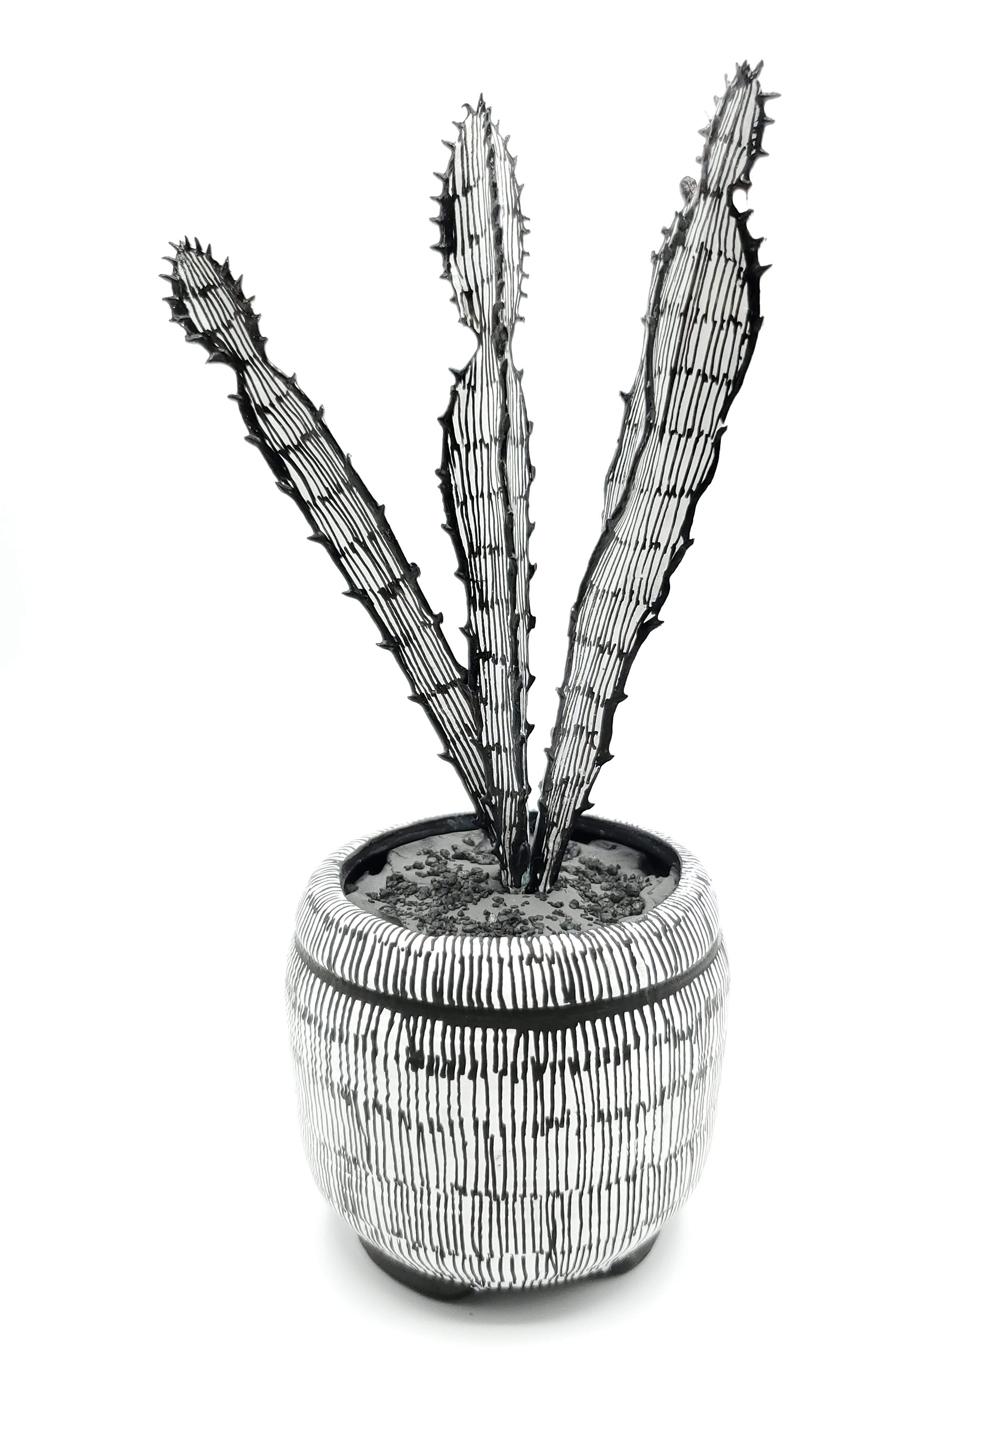 Contemporary Conceptual Plant Sculpture Cactus Drawing unique Female artist NYC - Mixed Media Art by Anne Muntges